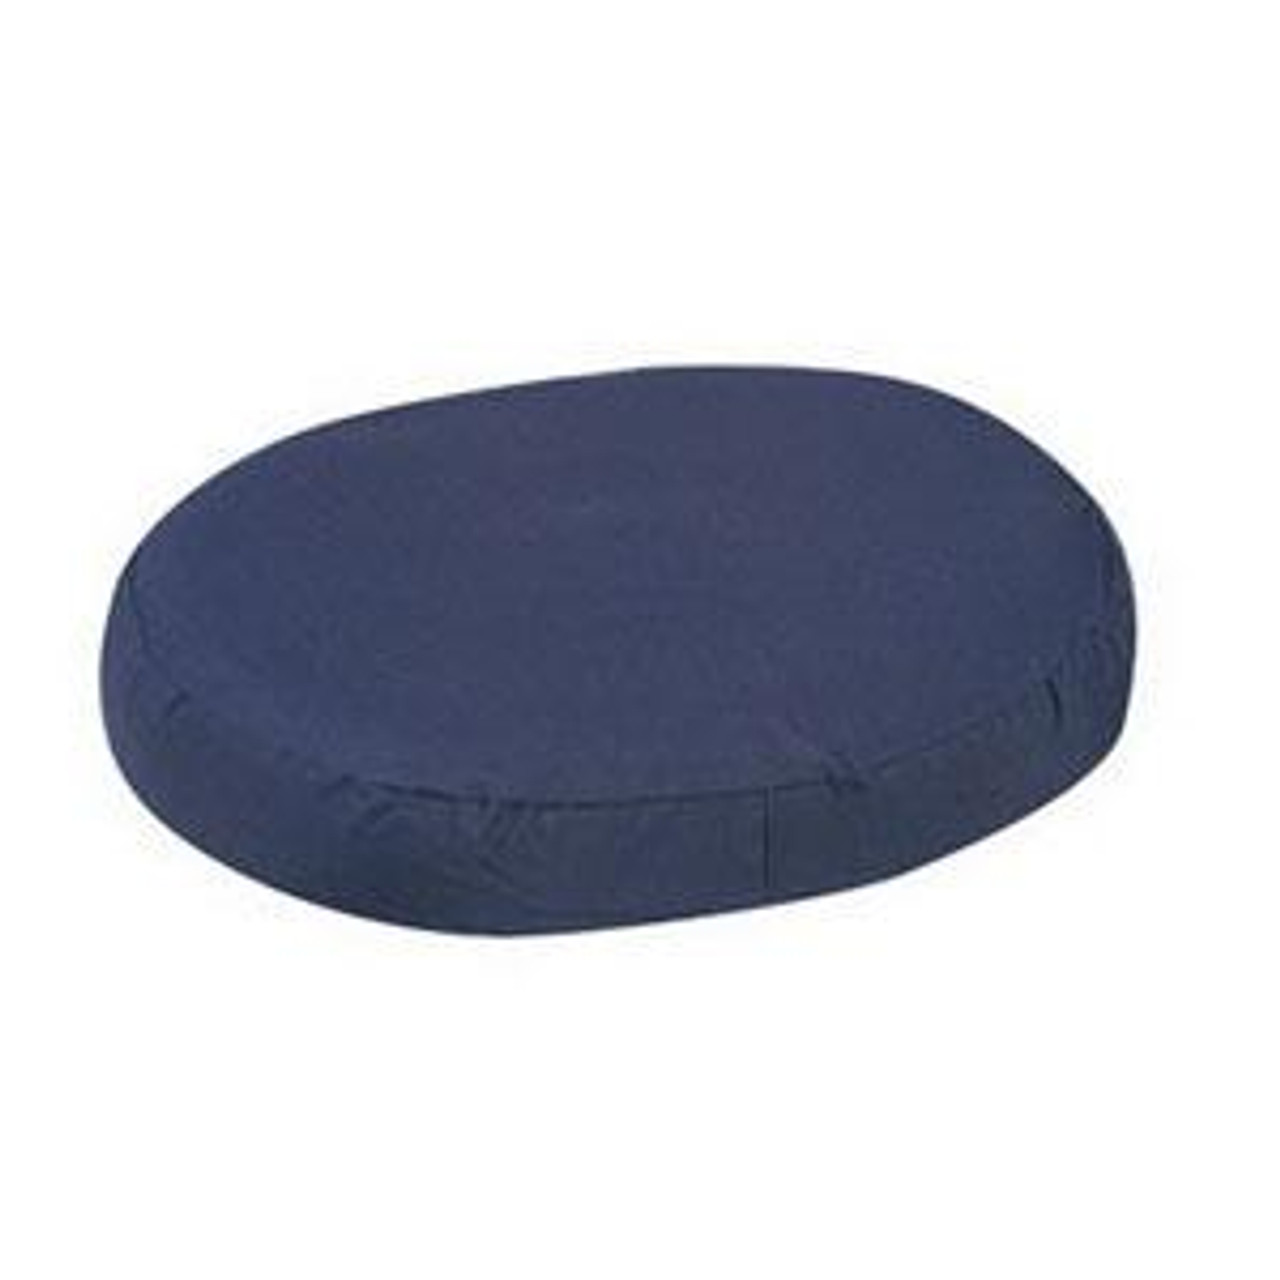 https://cdn11.bigcommerce.com/s-5yethr/images/stencil/1280x1280/products/5666/3364/Mabis_Healthcare_Contoured_Foam_Ring_with_Cover_MyCareHomeMedical__13694__22272.1385952194.jpg?c=2